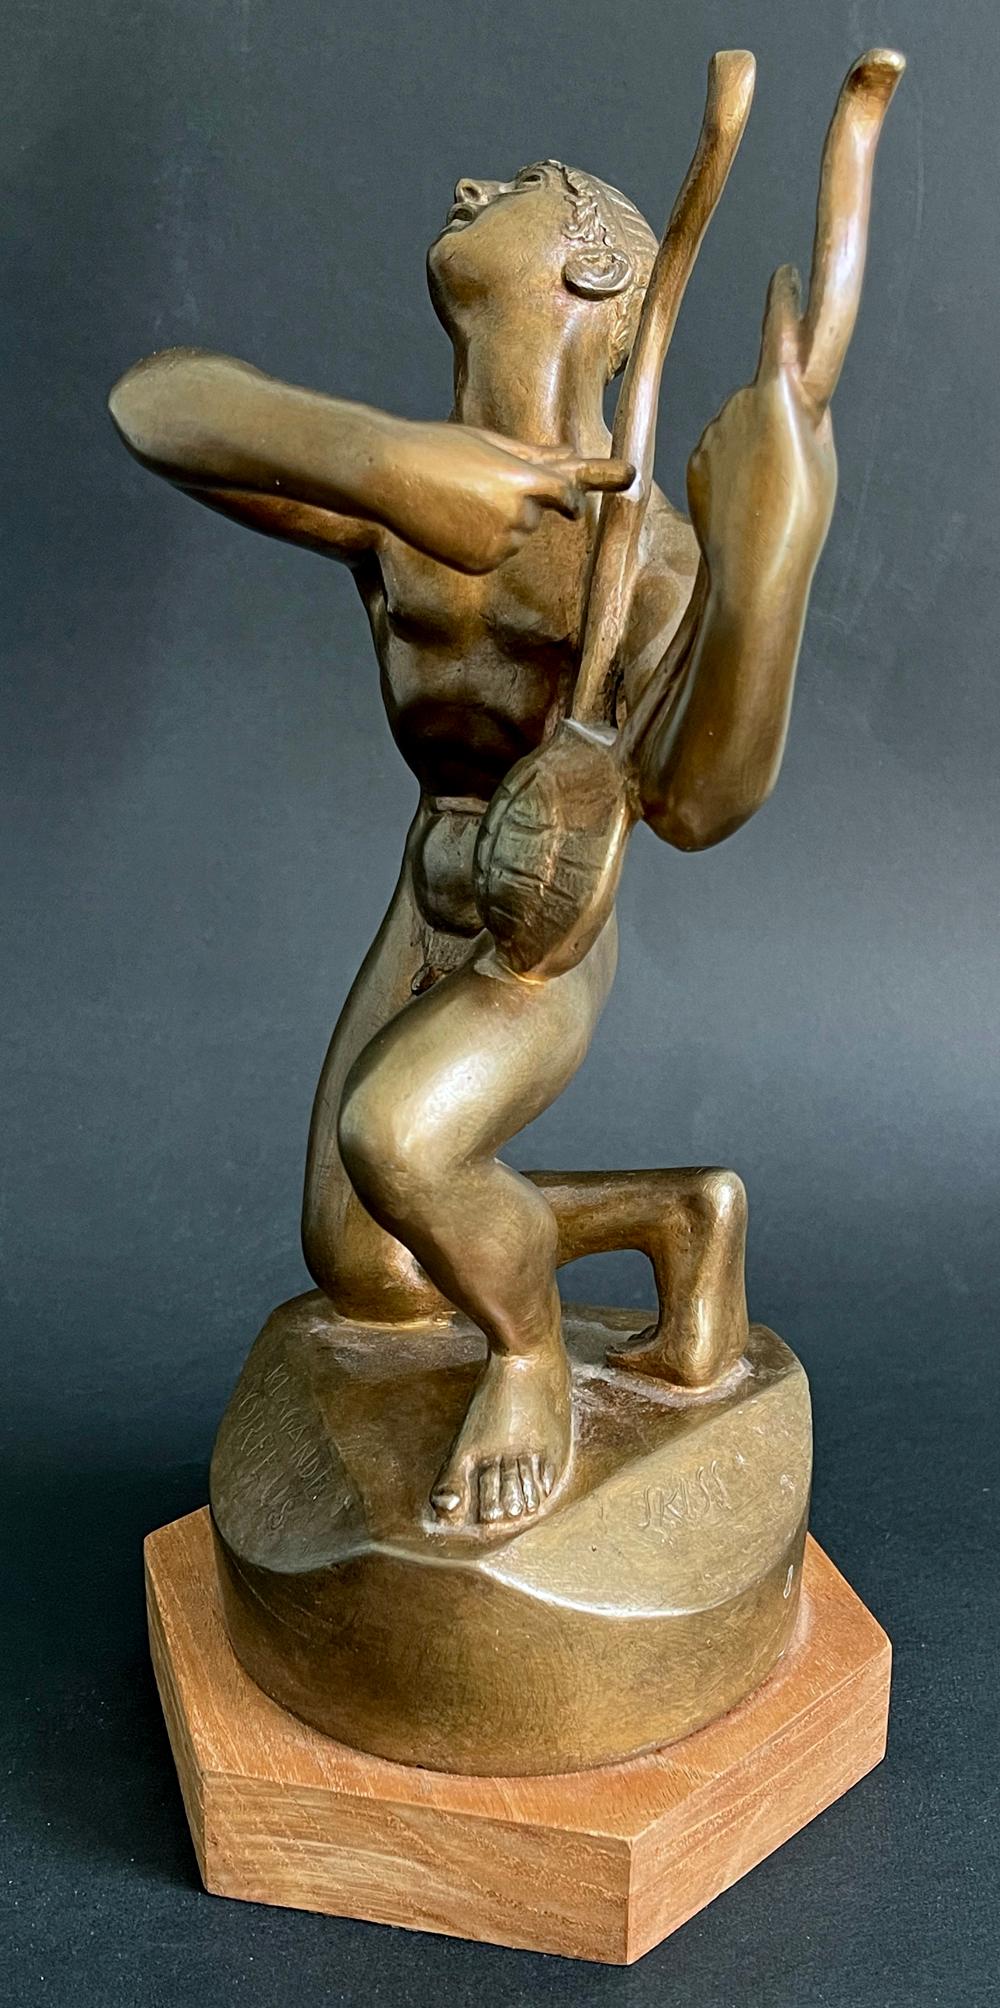 Beautifully sculpted by Tore Strindberg, one of Sweden's leading sculptors in the early 20th century, and sensitively cast and gilded by the Otto Meyers foundry in Stockholm, this piece captures the heartbreaking moment when Orpheus sings to the